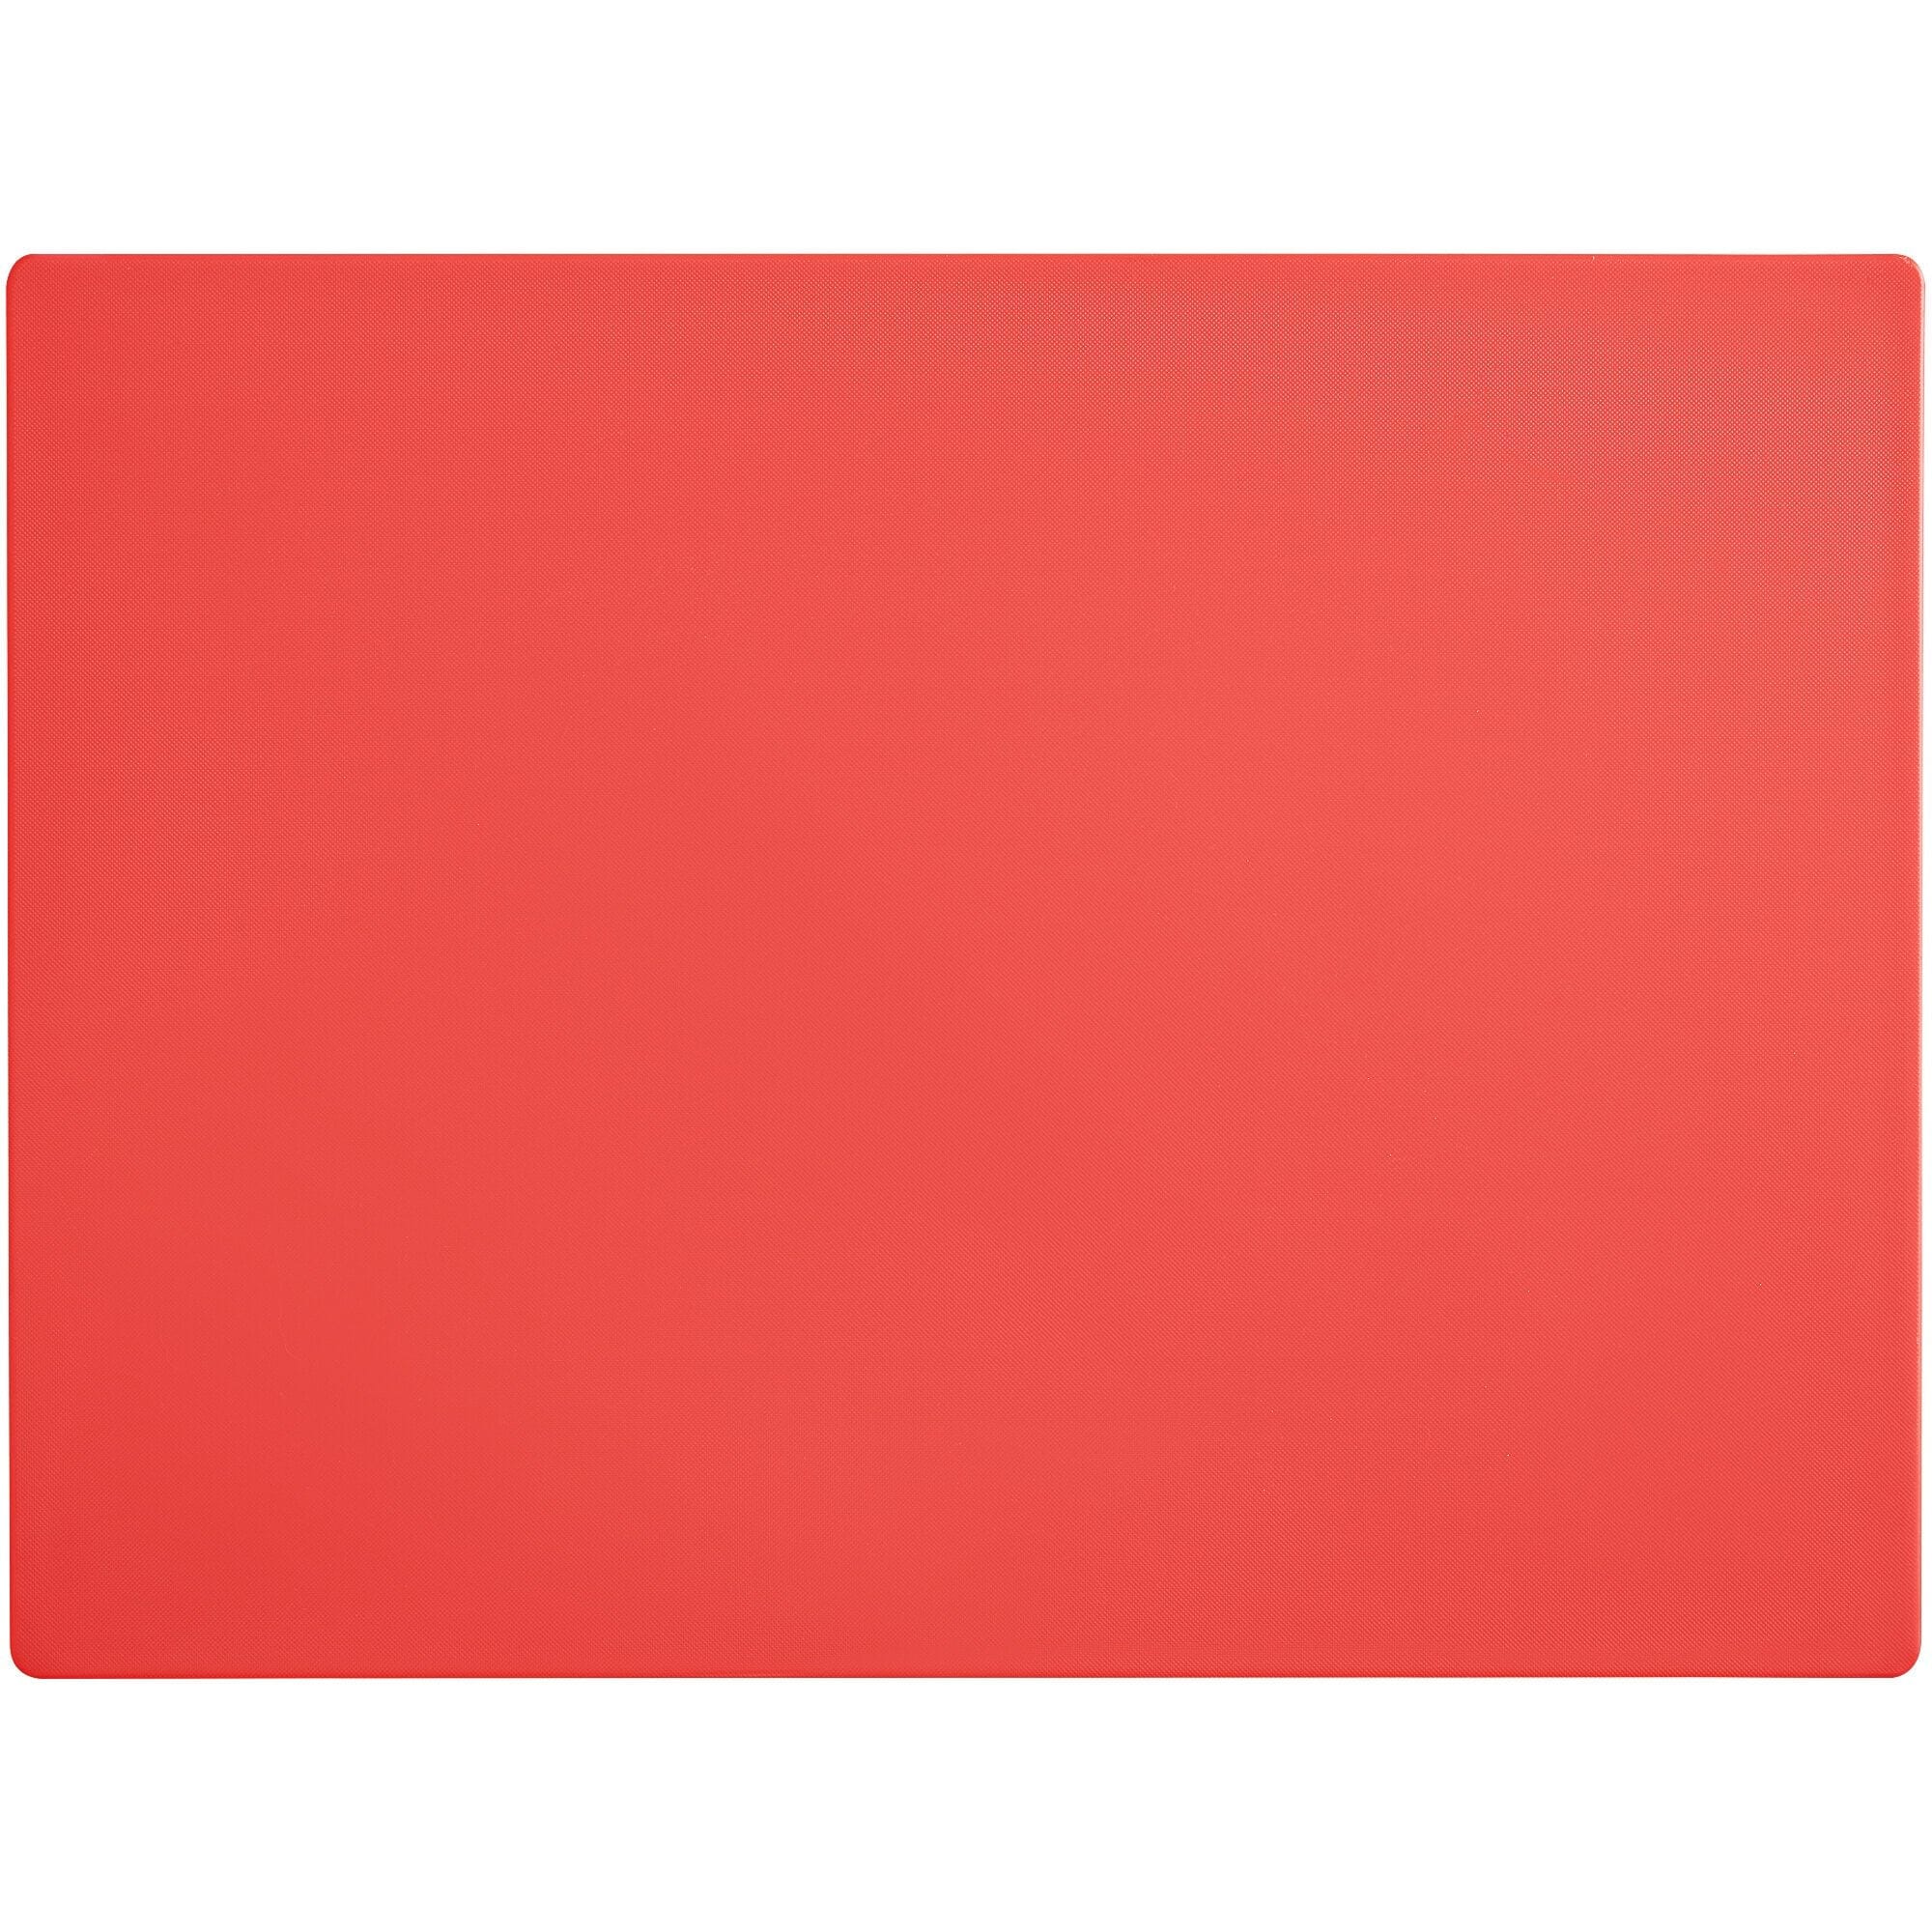 Royal Industries Cutting Board, 15inch x 20inch x 1/2 inch Red The material guarantees maximum sanitation, resisting cut-grooving, which could potentially absorb juice, bacteria,or odor, without compromising your blade's sharpness-ROY CB 1520 R